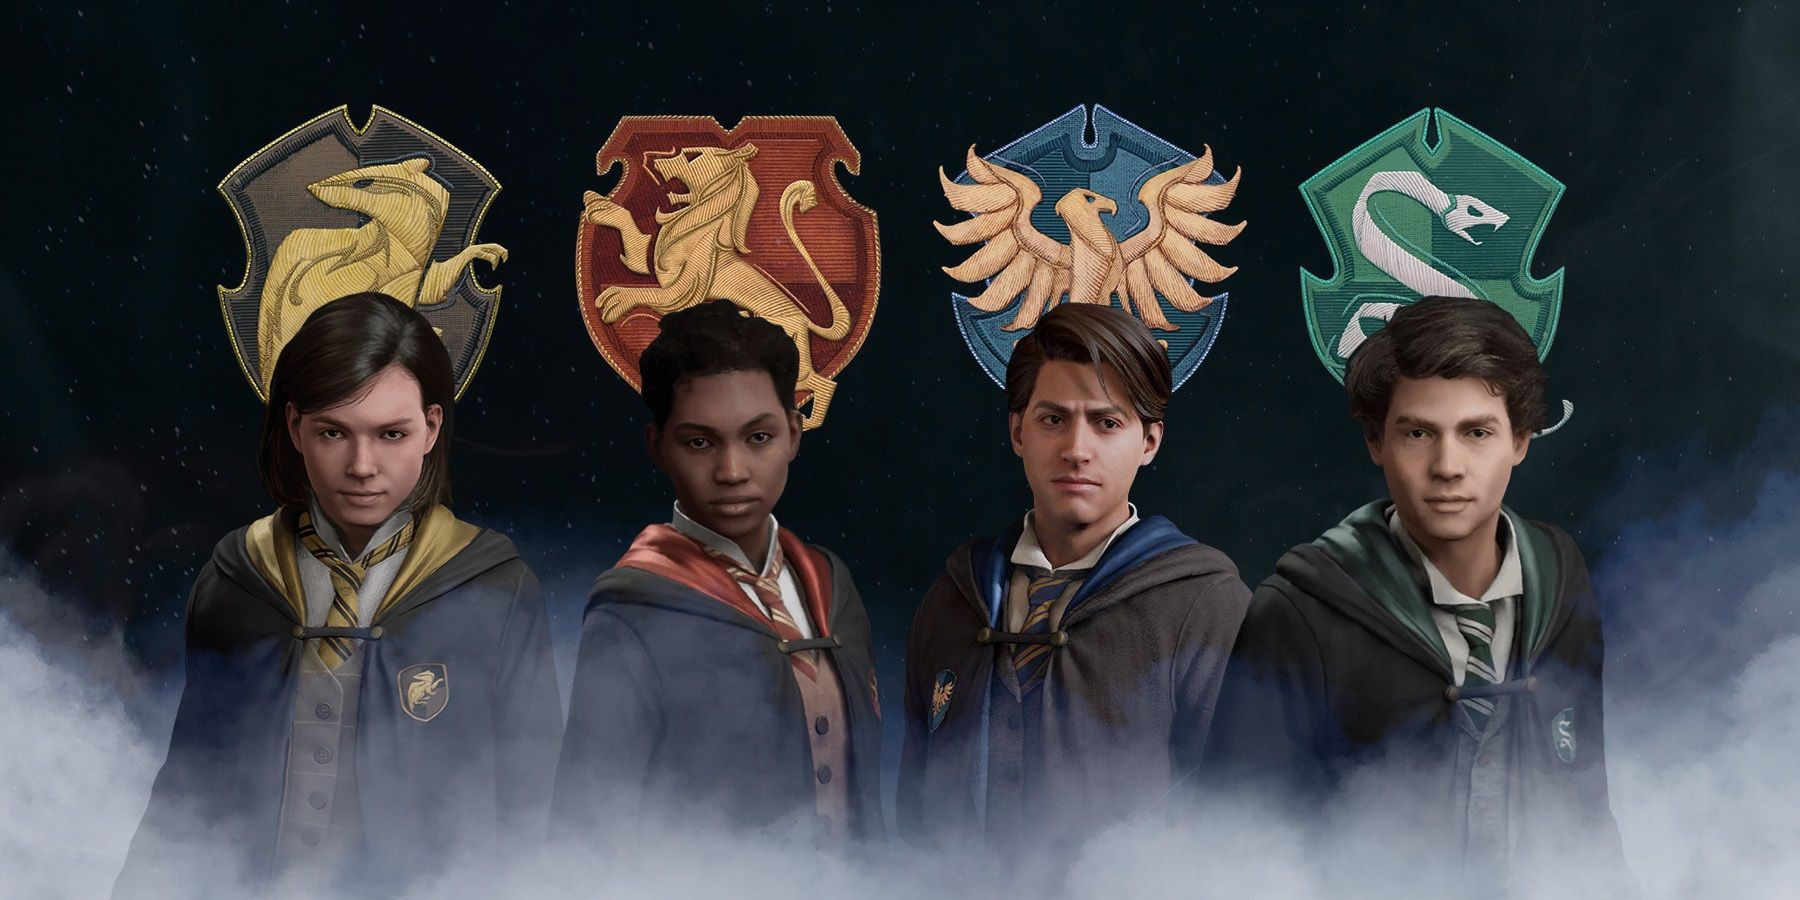 Some of the characters in Hogwarts Legacy from different houses